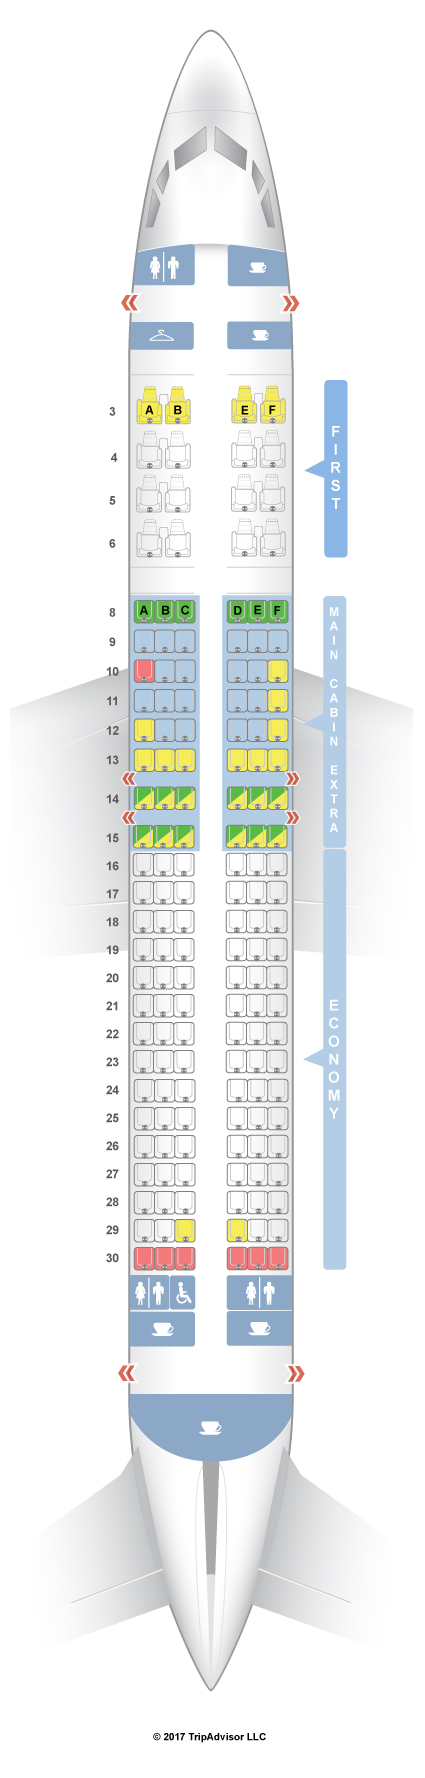 American Airlines Boeing 777 Domestic Seating Map Aircraft Chart American Airlines American Airlines Flight Attendant Airline Seats